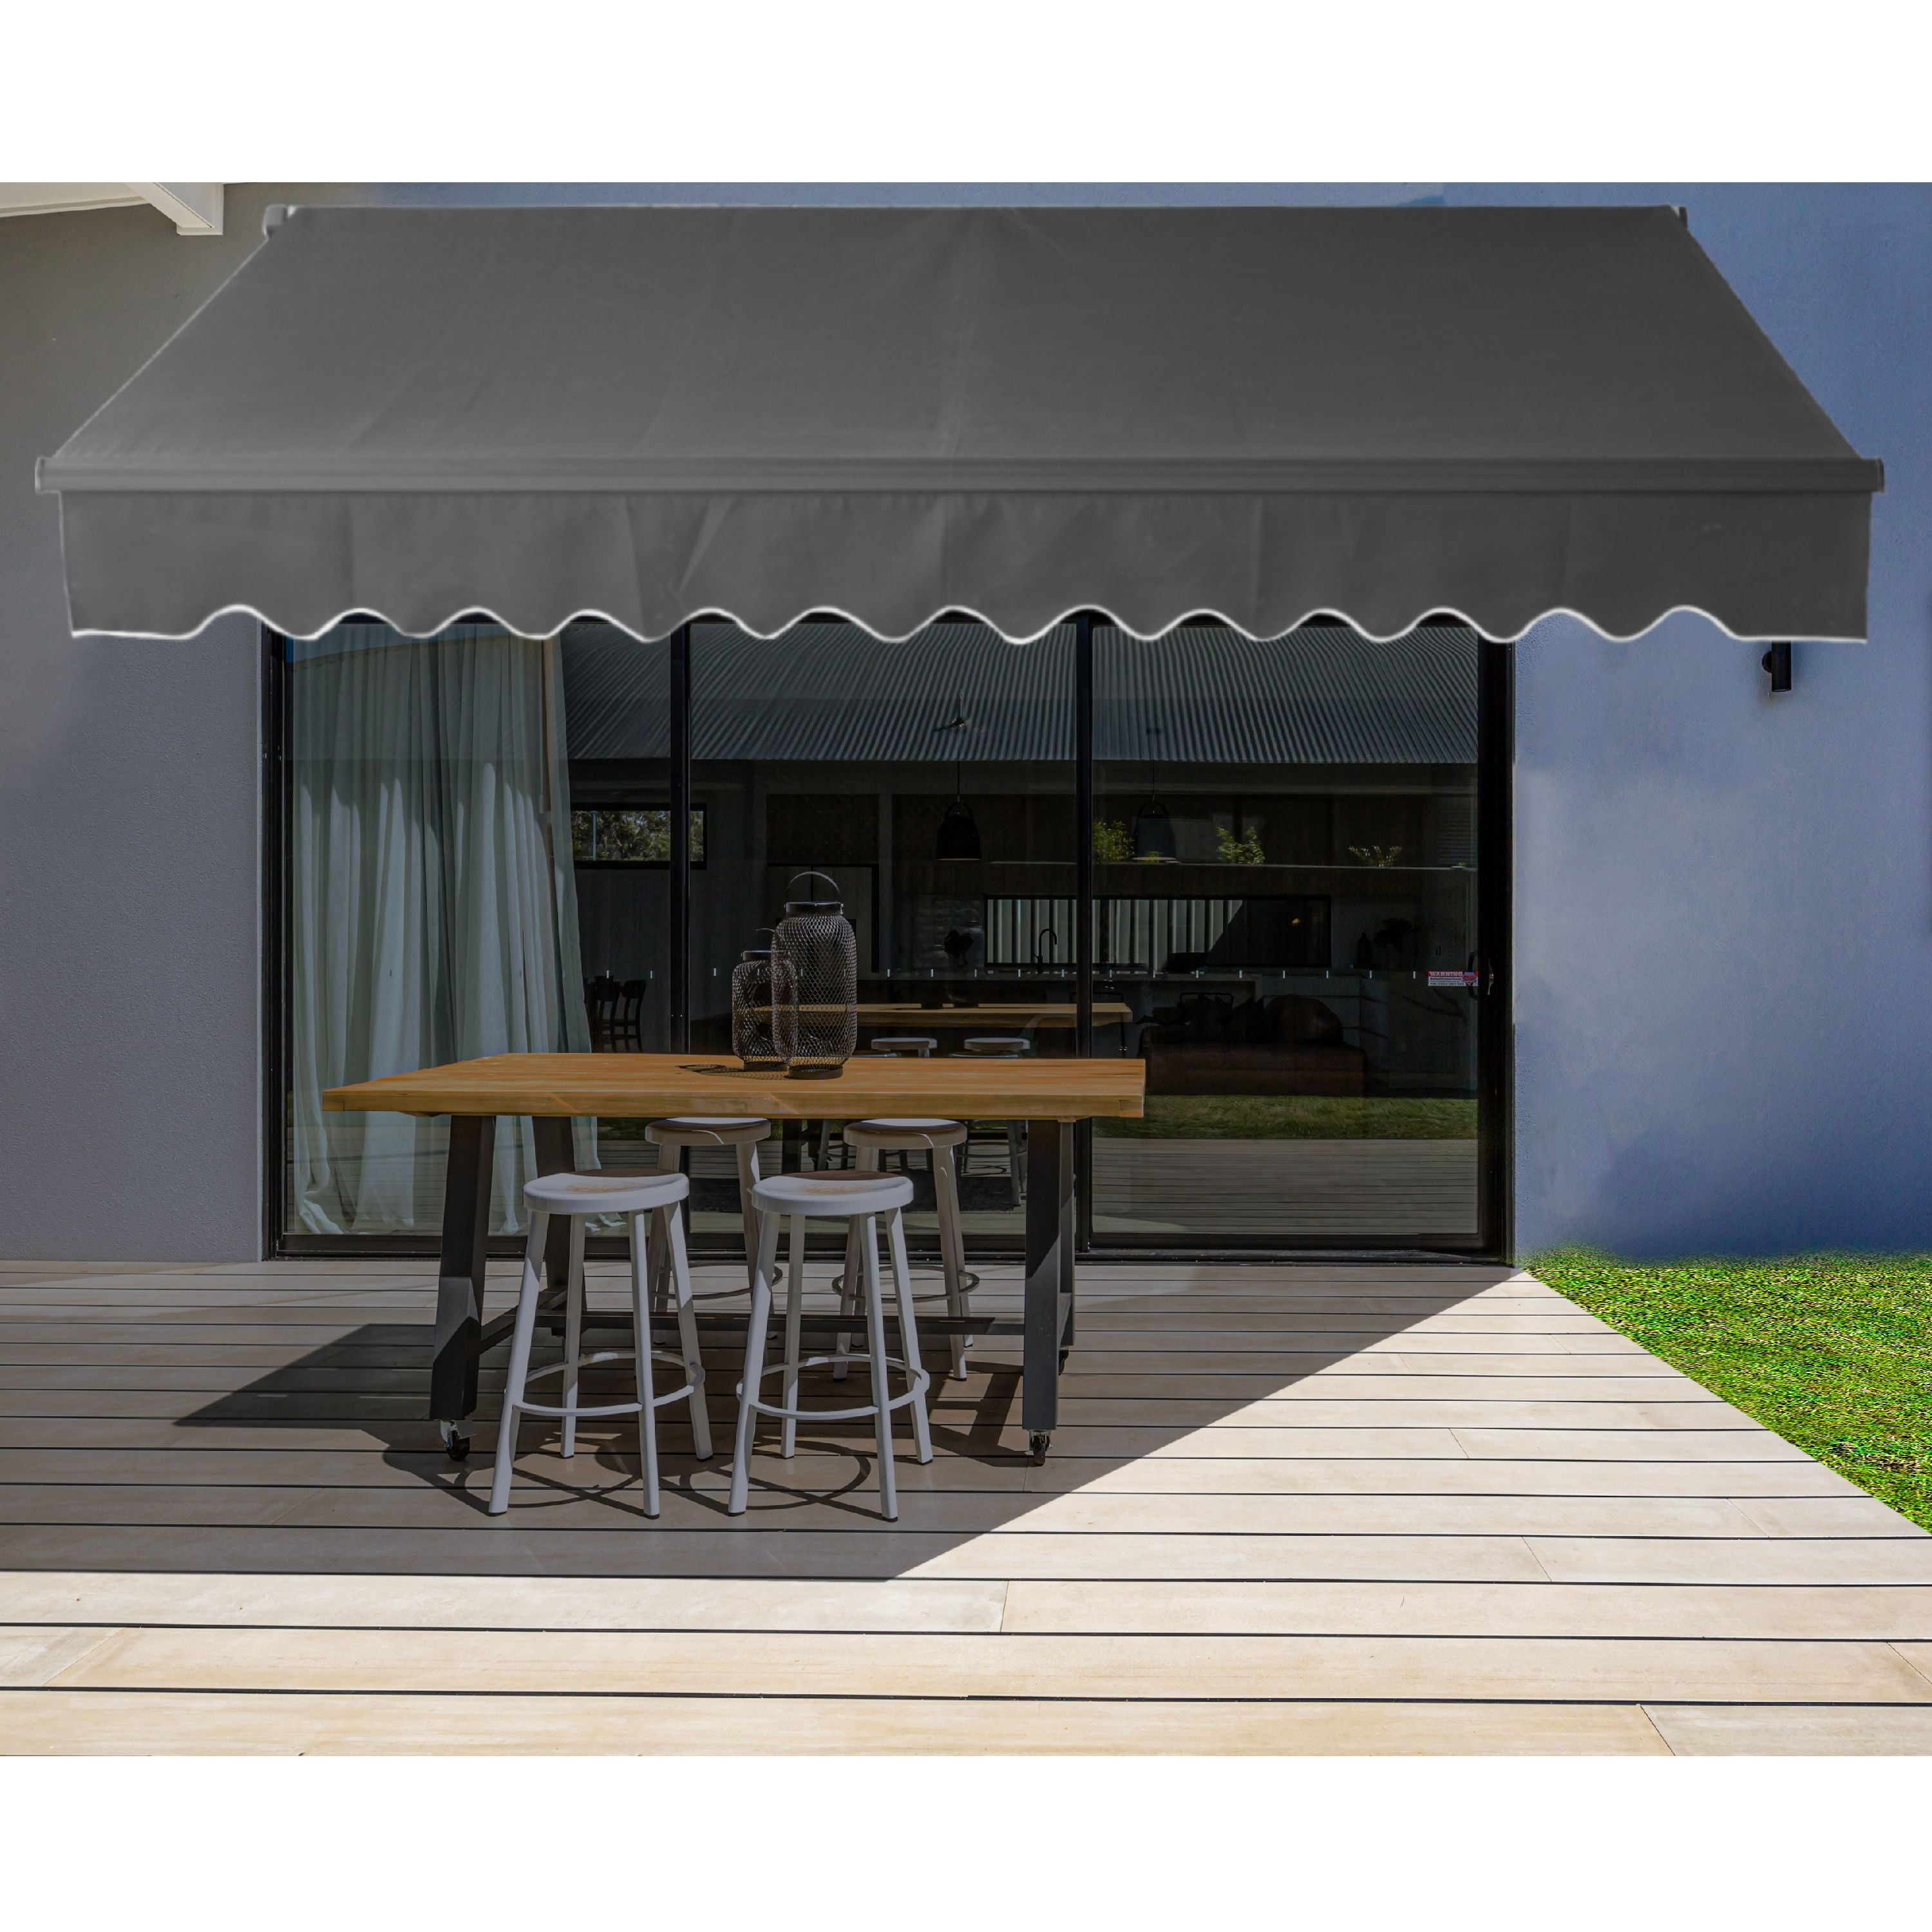 Ab13x10bk81 13 X 10 Ft. Black Frame Retractable Home Patio Canopy Awning, Black